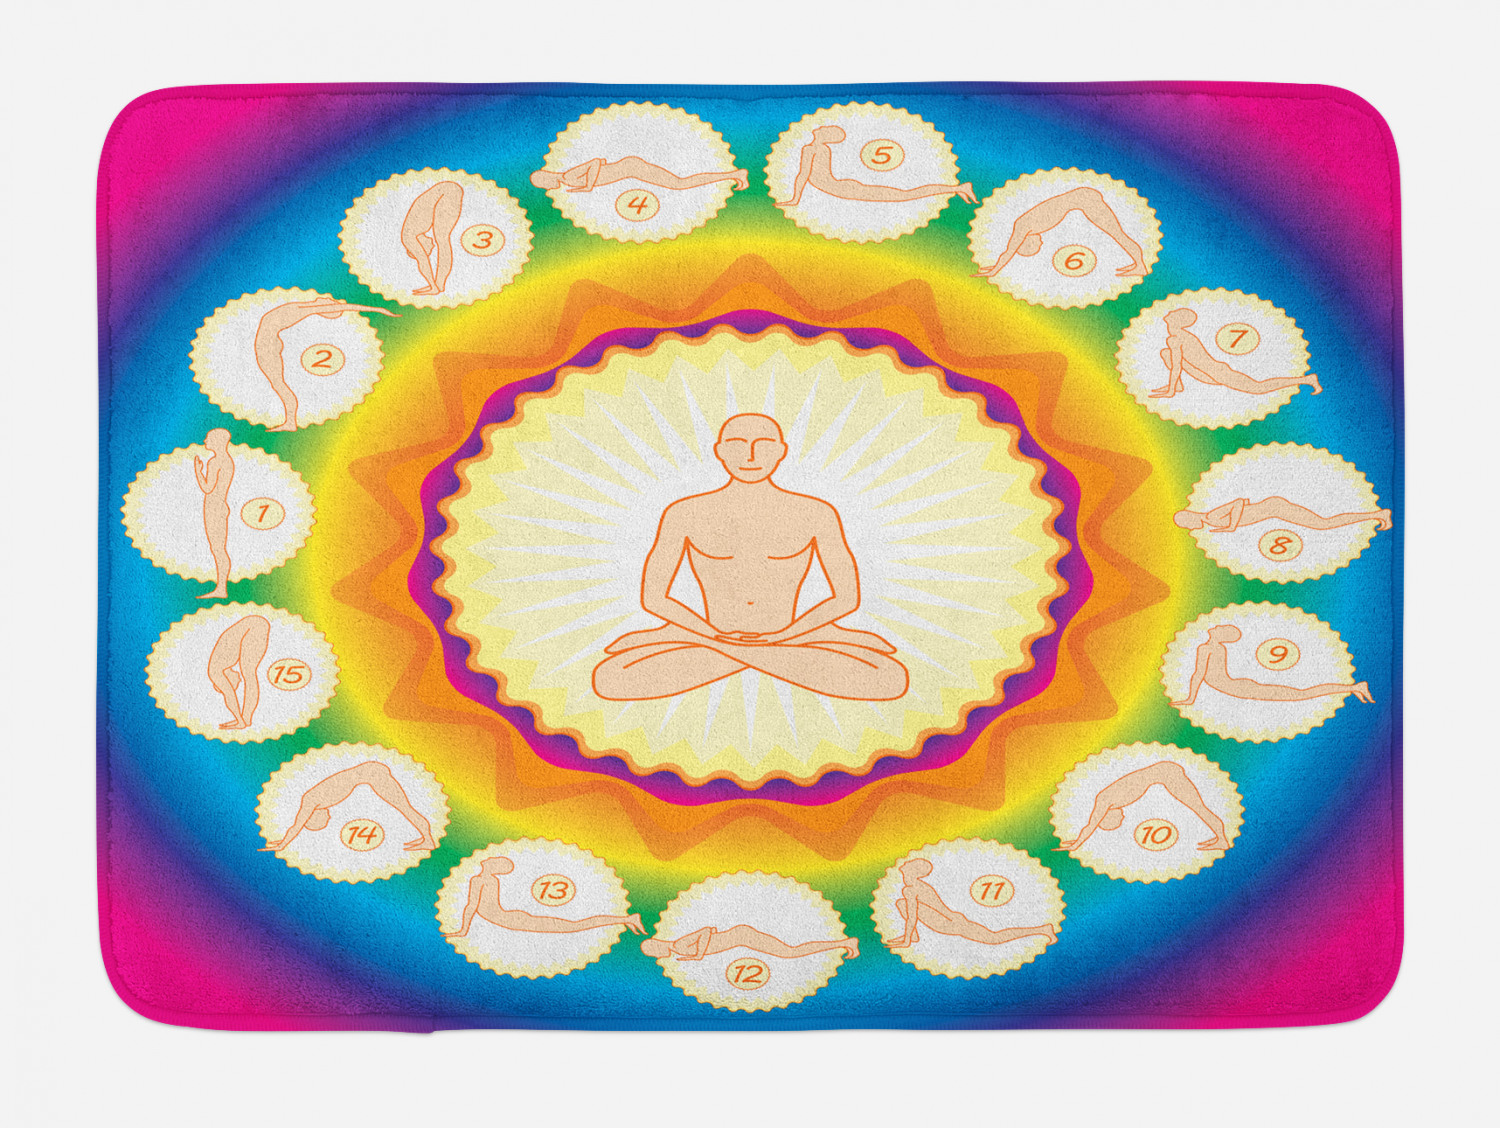 Yoga Bath Mat, Yogi in The Lotus Posture and Exercises in Several Positions Surya Namaskar Vitality, Non-Slip Plush Mat Bathroom Kitchen Laundry Room Decor, 29.5 X 17.5 Inches, Multicolor, Ambesonne - image 1 of 2